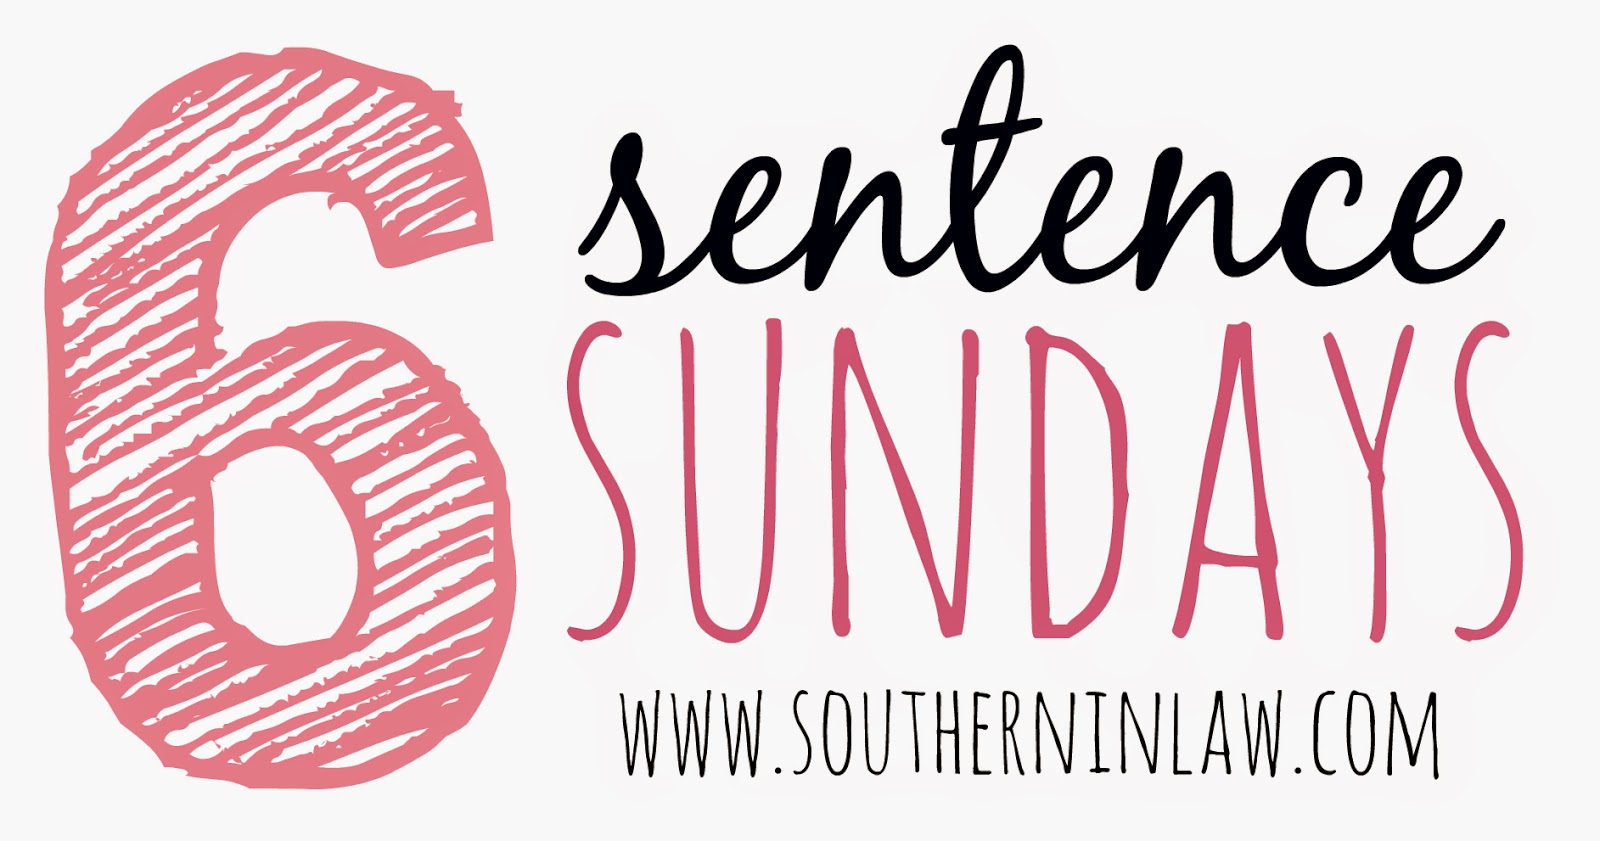 6 Sentence Sunday at Southern In-Law